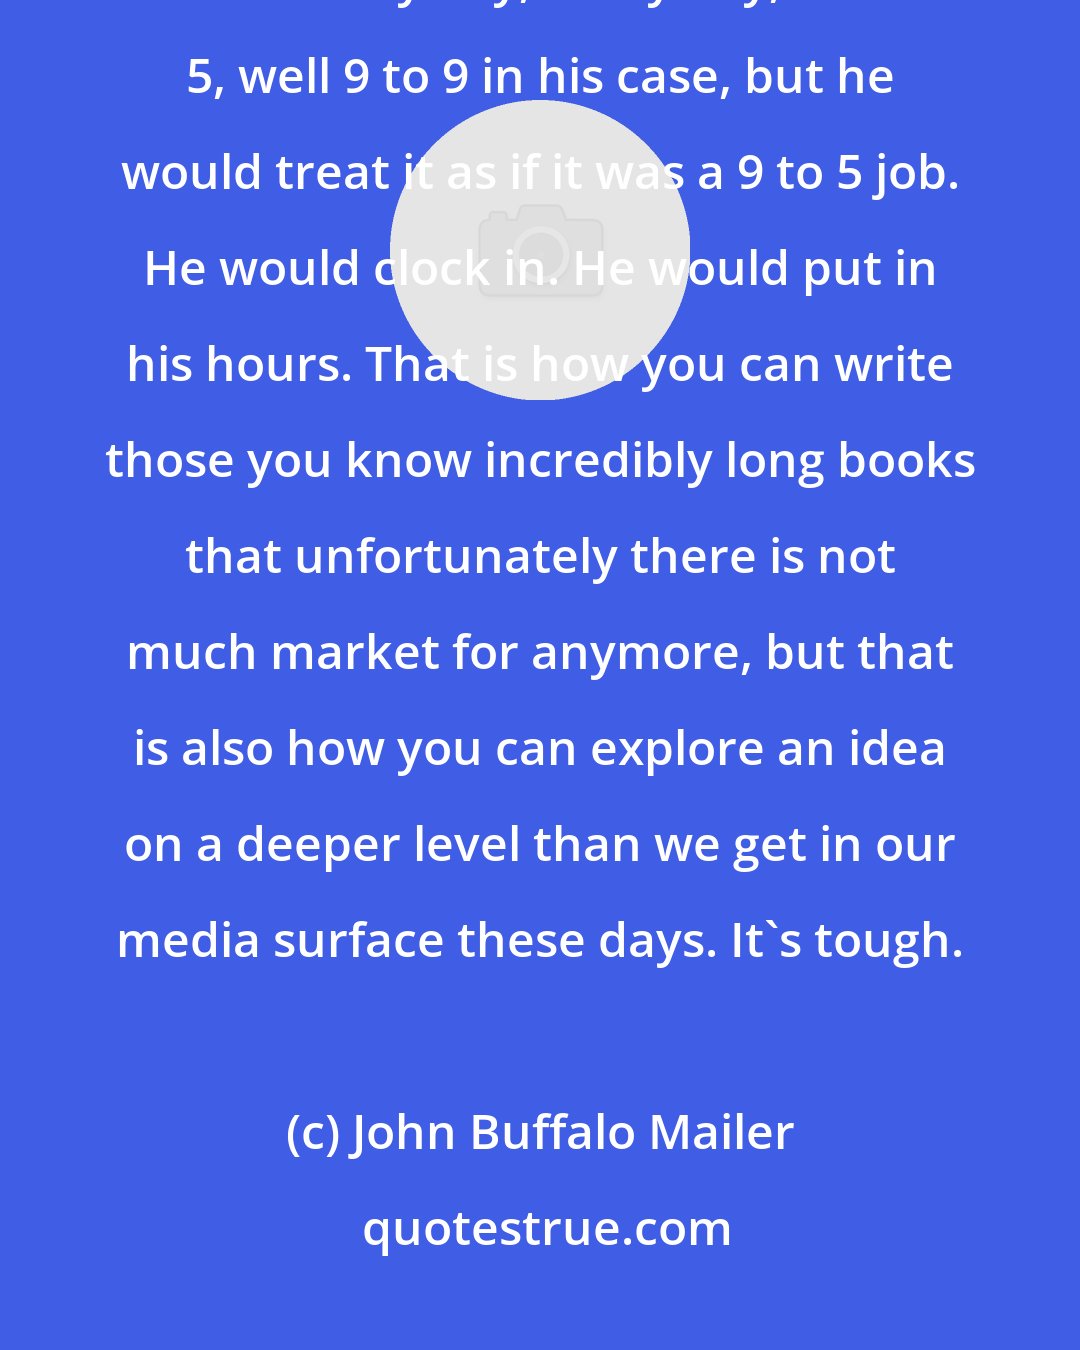 John Buffalo Mailer: Work ethic is one of the biggest things my father taught me. That man worked like every day, every day, 9 to 5, well 9 to 9 in his case, but he would treat it as if it was a 9 to 5 job. He would clock in. He would put in his hours. That is how you can write those you know incredibly long books that unfortunately there is not much market for anymore, but that is also how you can explore an idea on a deeper level than we get in our media surface these days. It's tough.